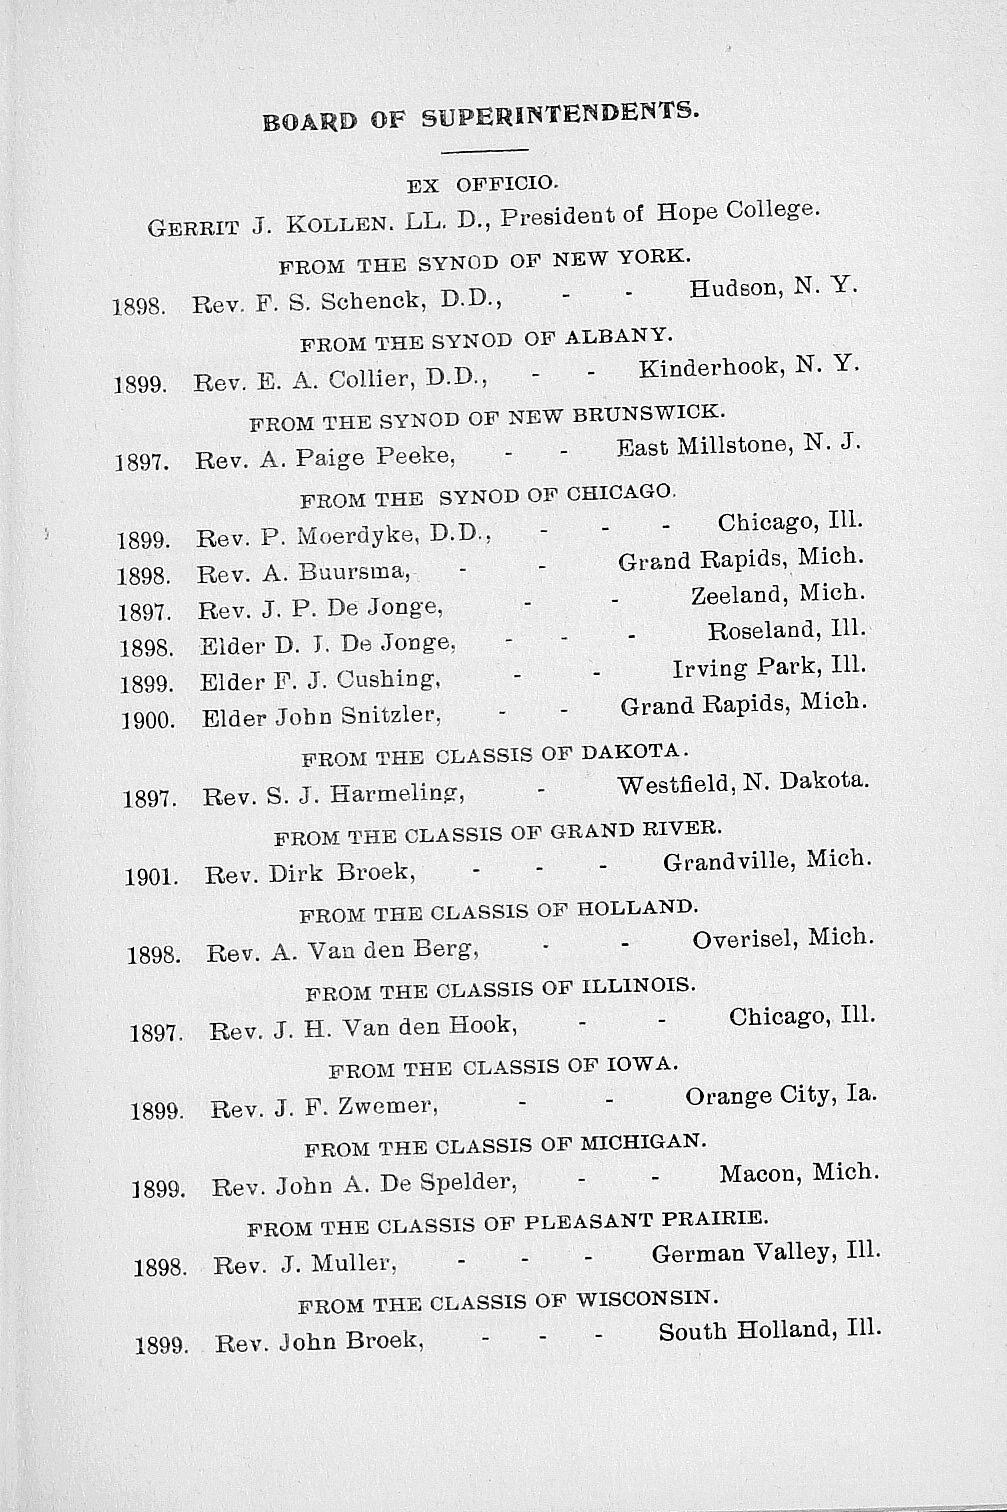 BOARD OF SUPERINTENDENTS. EX OFFICIO. GERRIT J. KOLLEN. LL. D., President of Hope College. FROM THE SYNOD OF NEW YORK. 1898. Rev. F. S. Schenck, D.D., - - Hudson, N. Y. FROM THE SYNOD OF ALBANY. 1899.